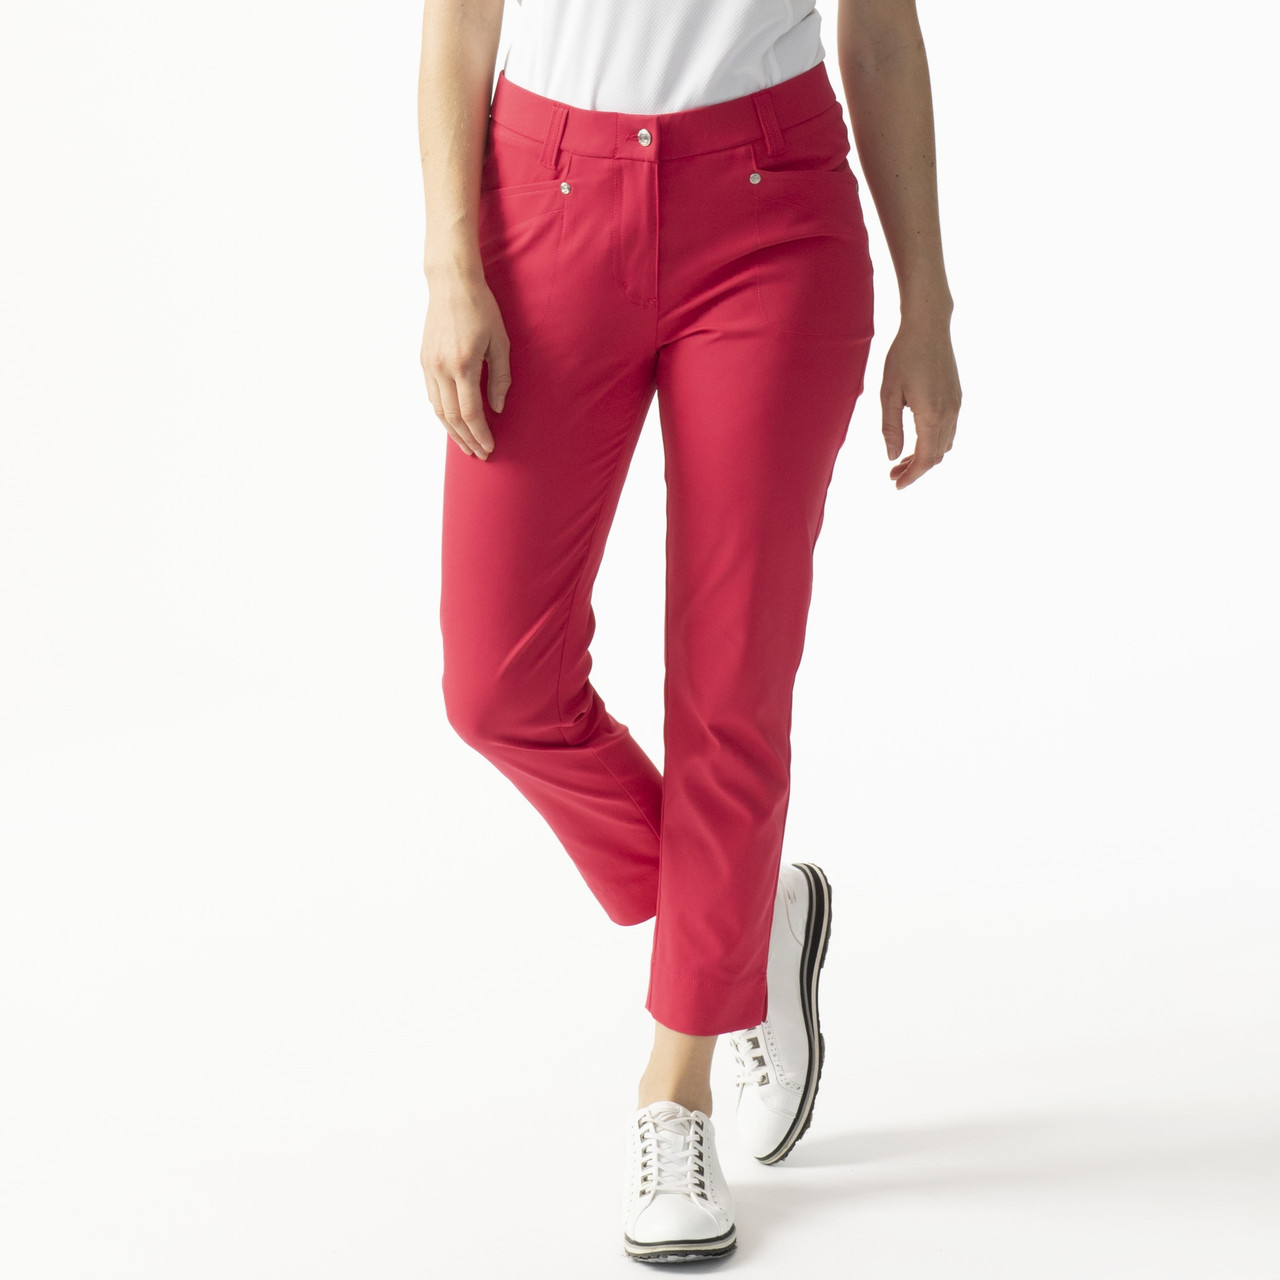 Daily Sports Lyric High Water Ankle Pants - Berry Red - Fore Ladies - Golf  Dresses and Clothes, Tennis Skirts and Outfits, and Fashionable Activewear